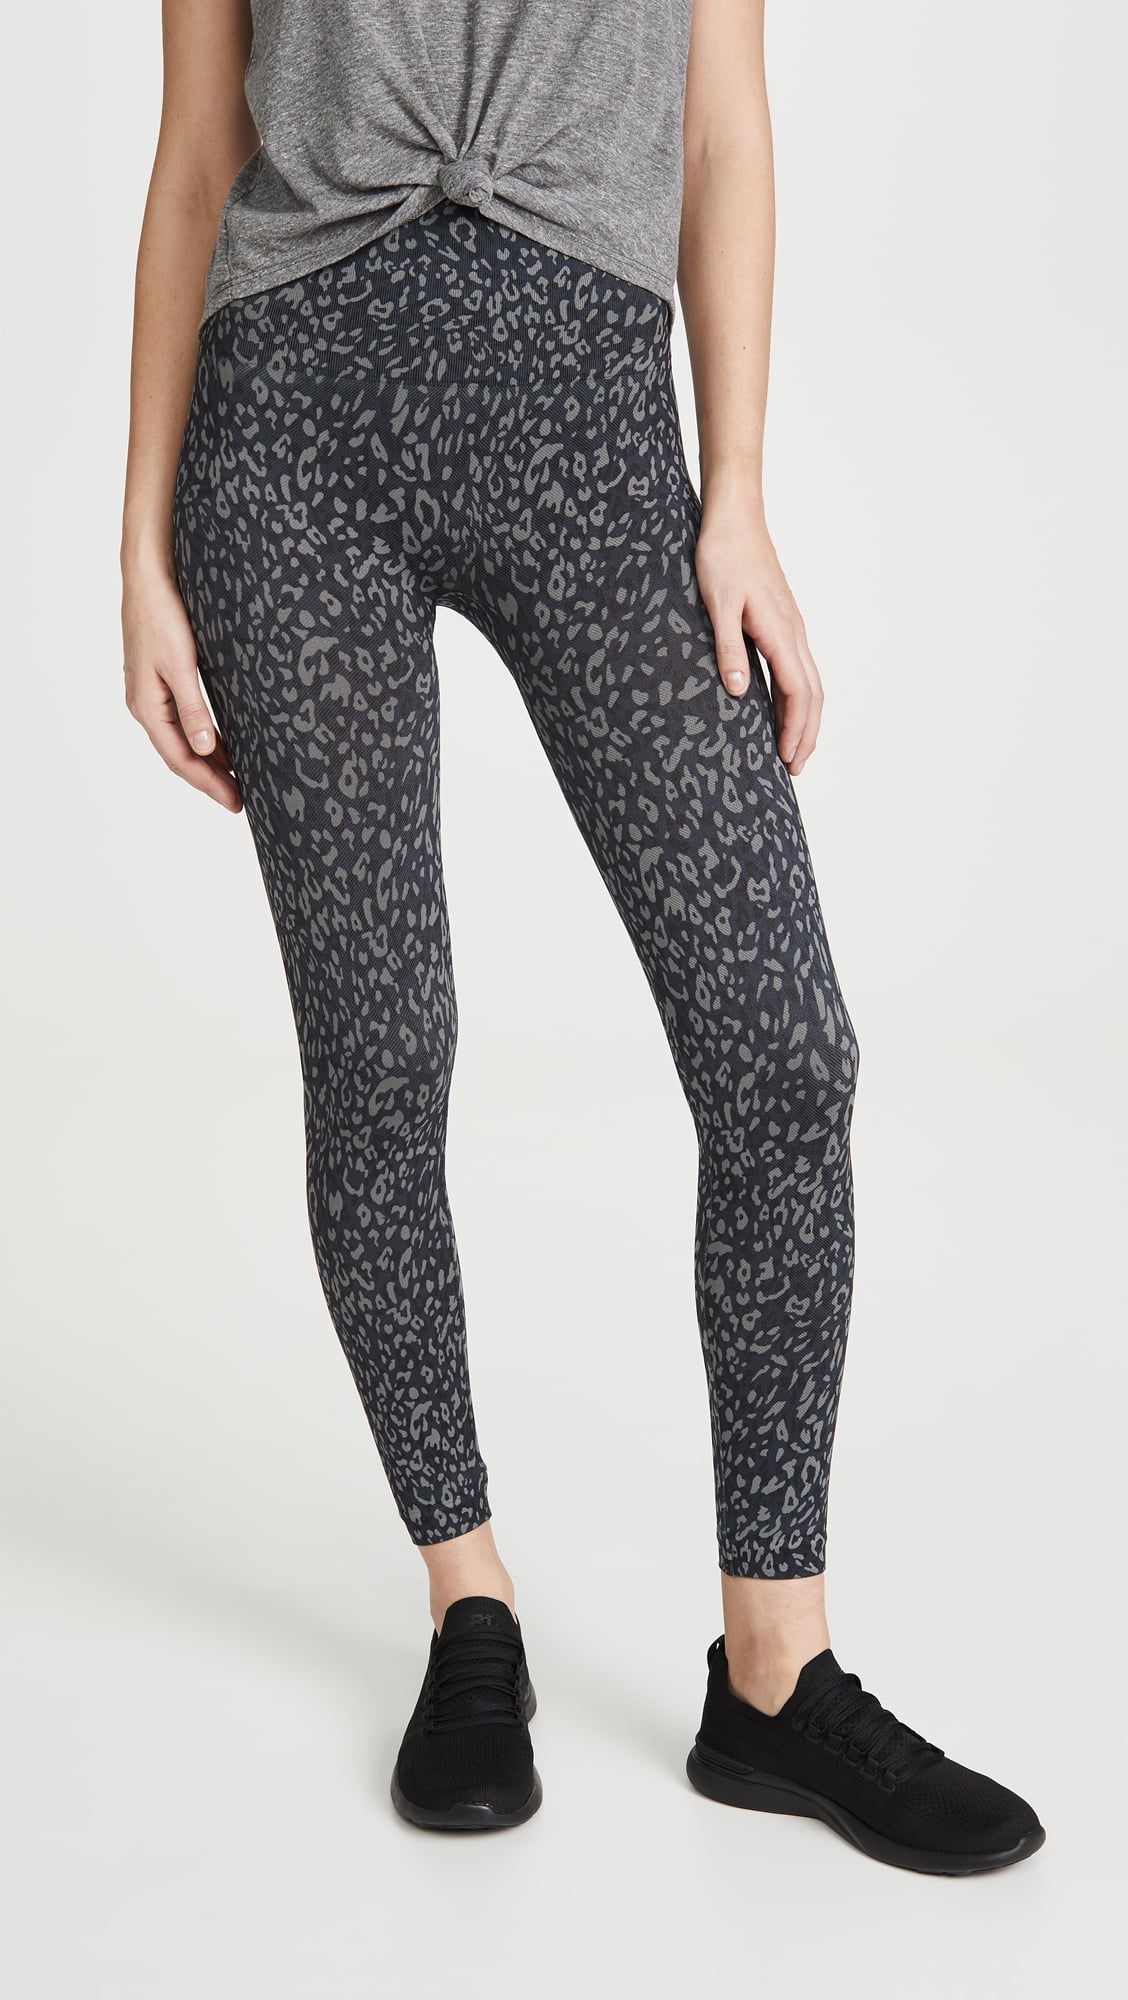 Where to buy animal print leggings and activewear: Best athleisure